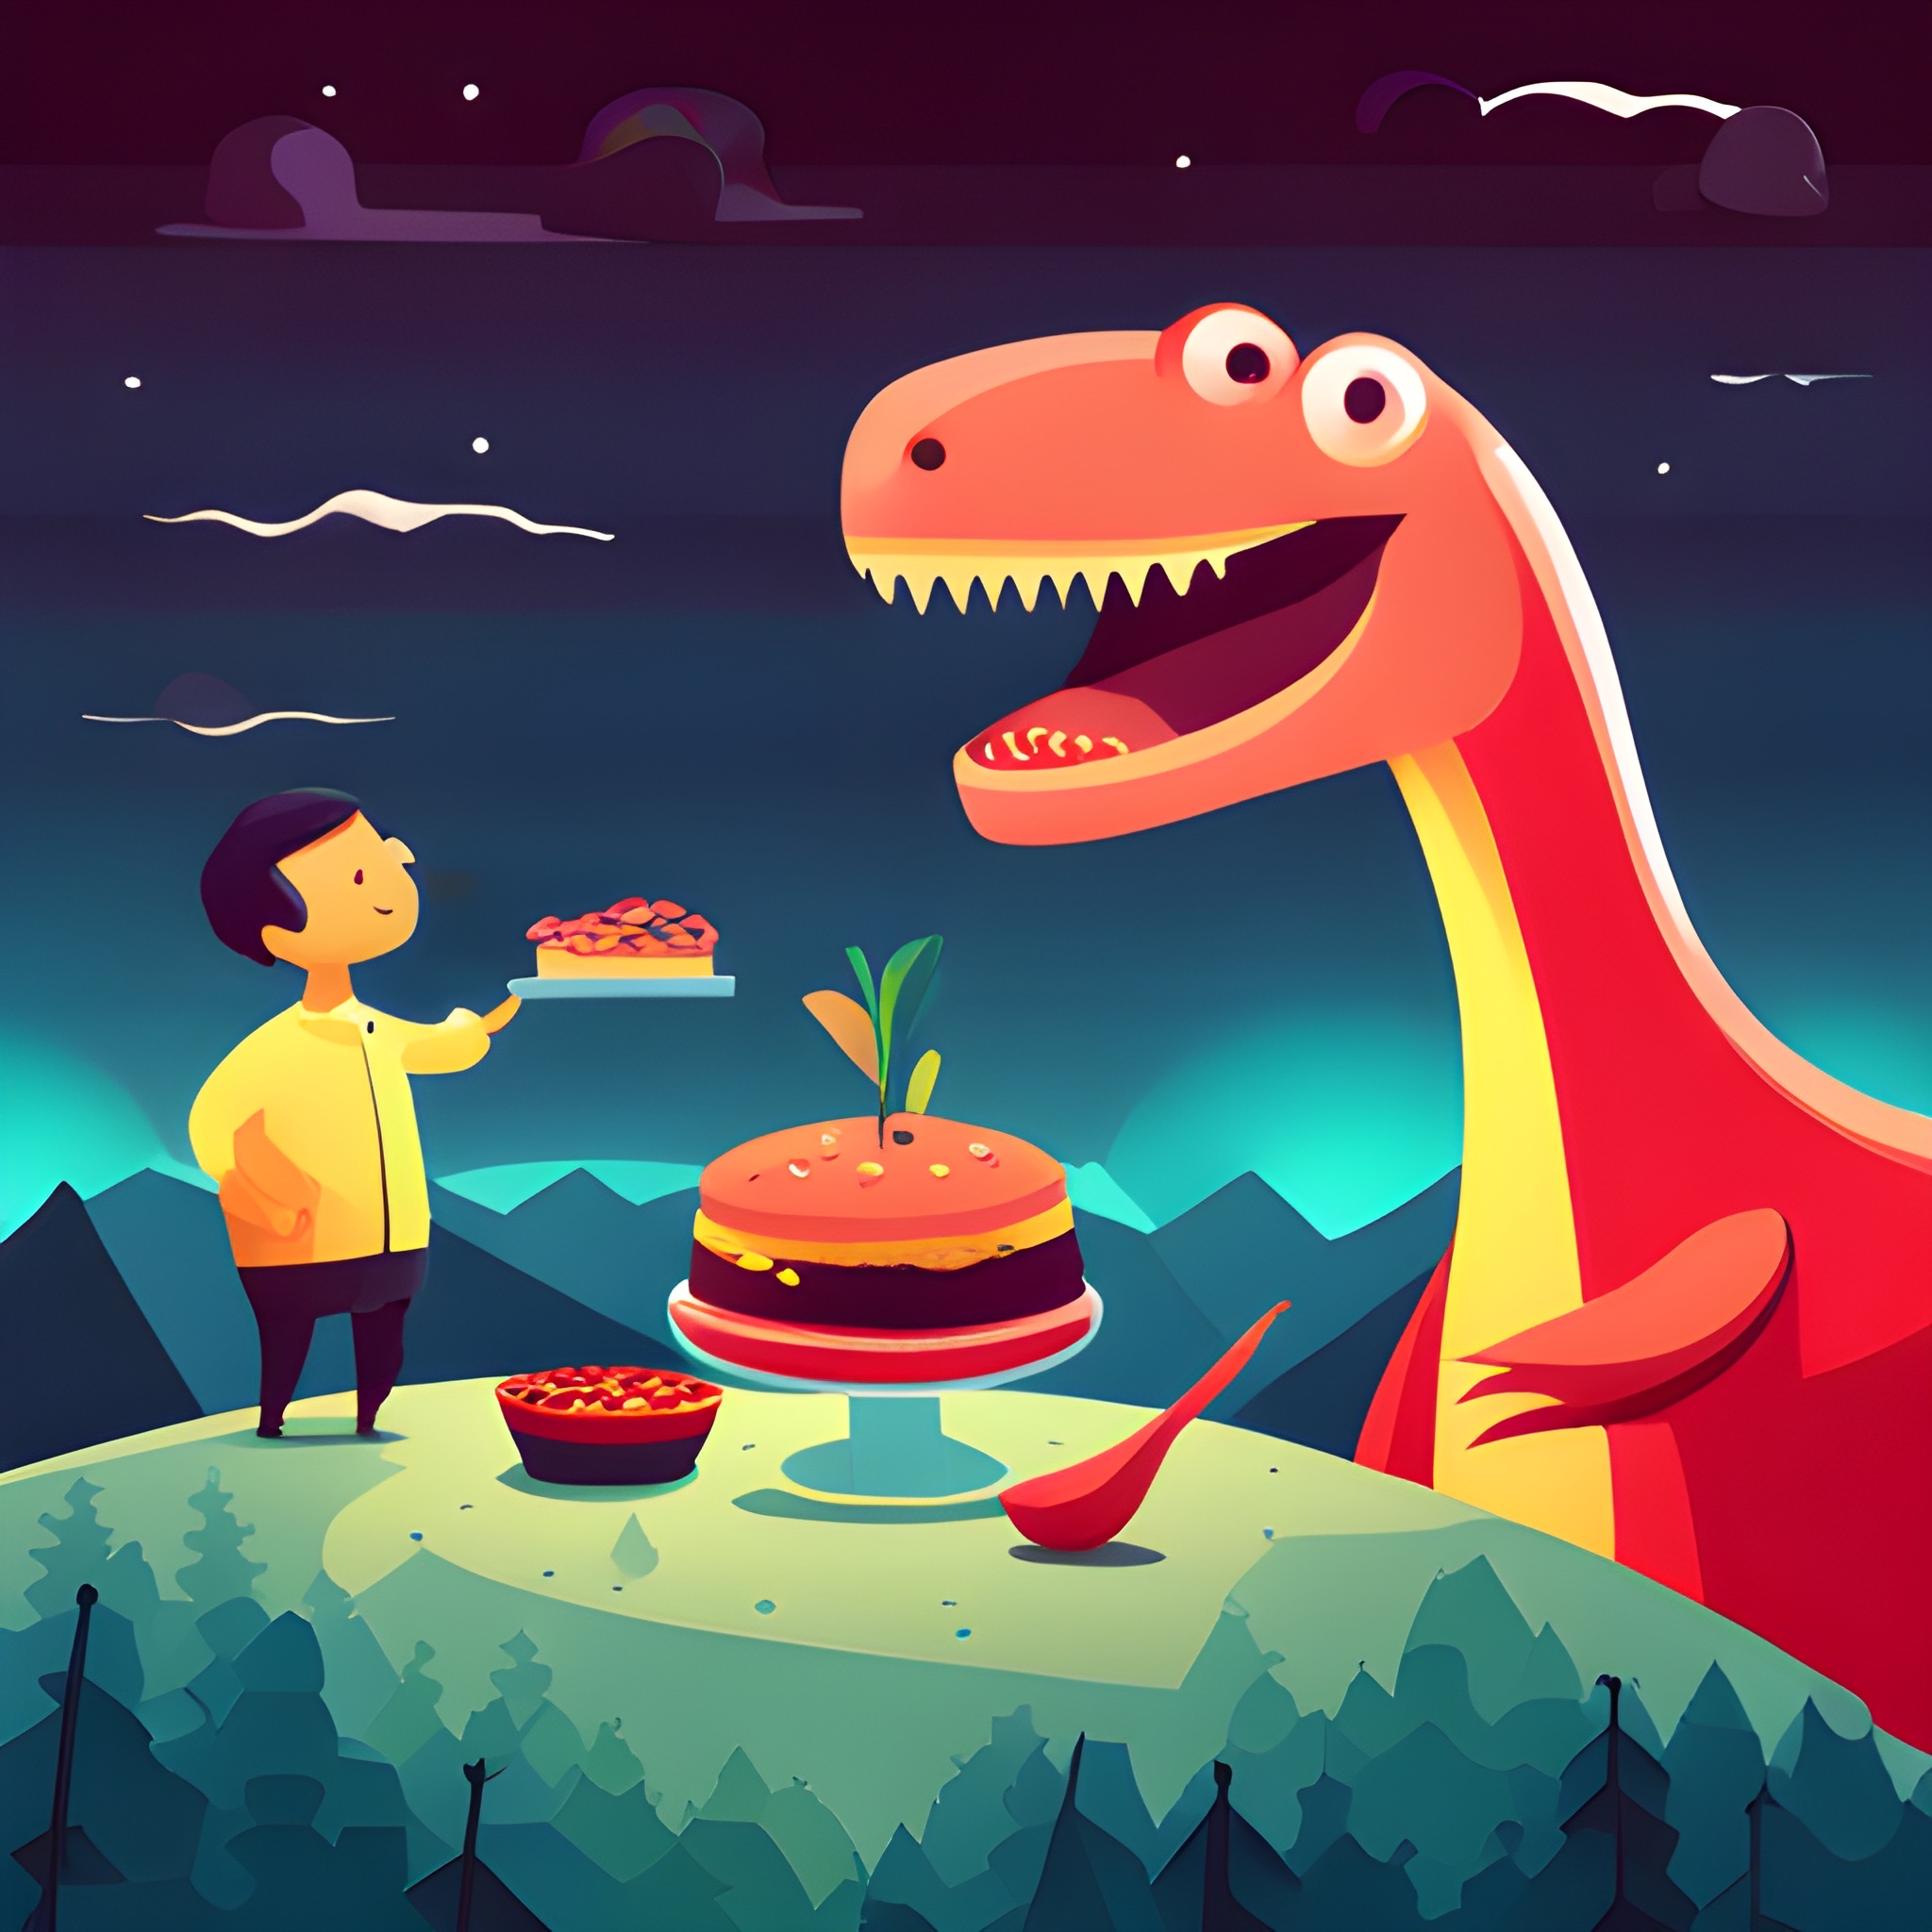 This dino will be "eventually" not hungry anymore